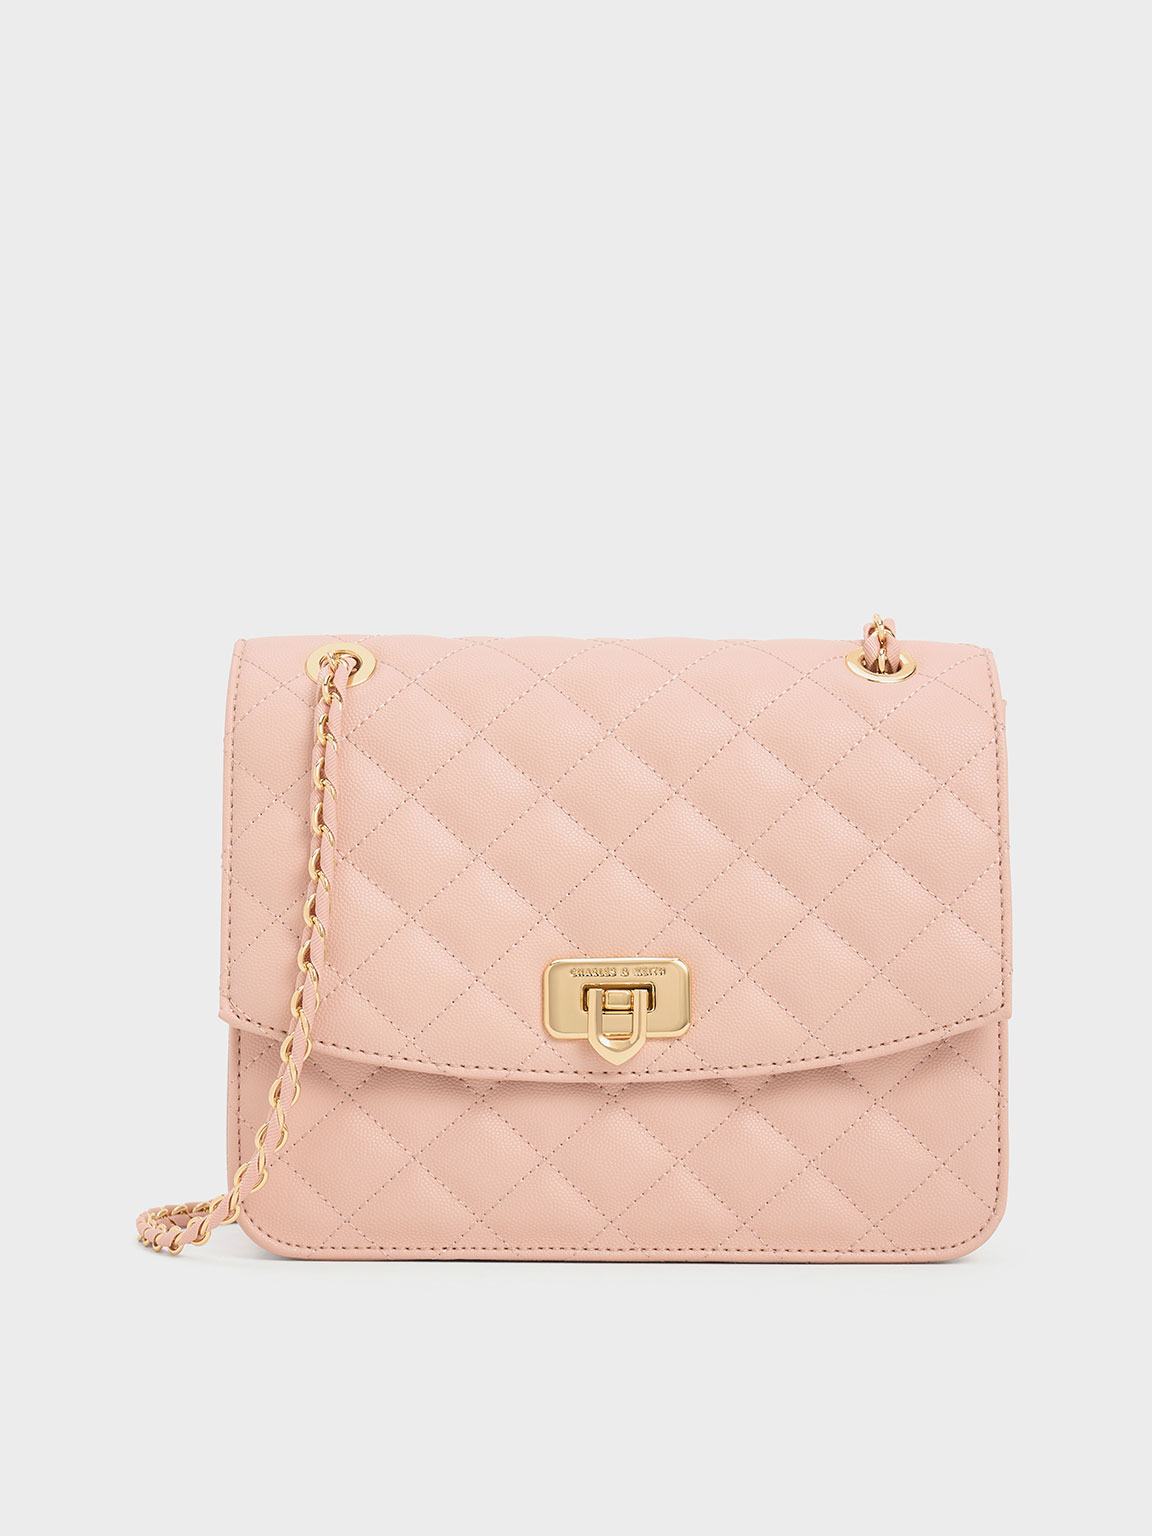 Charles & Keith Cressida Chain Strap Bag In Pink